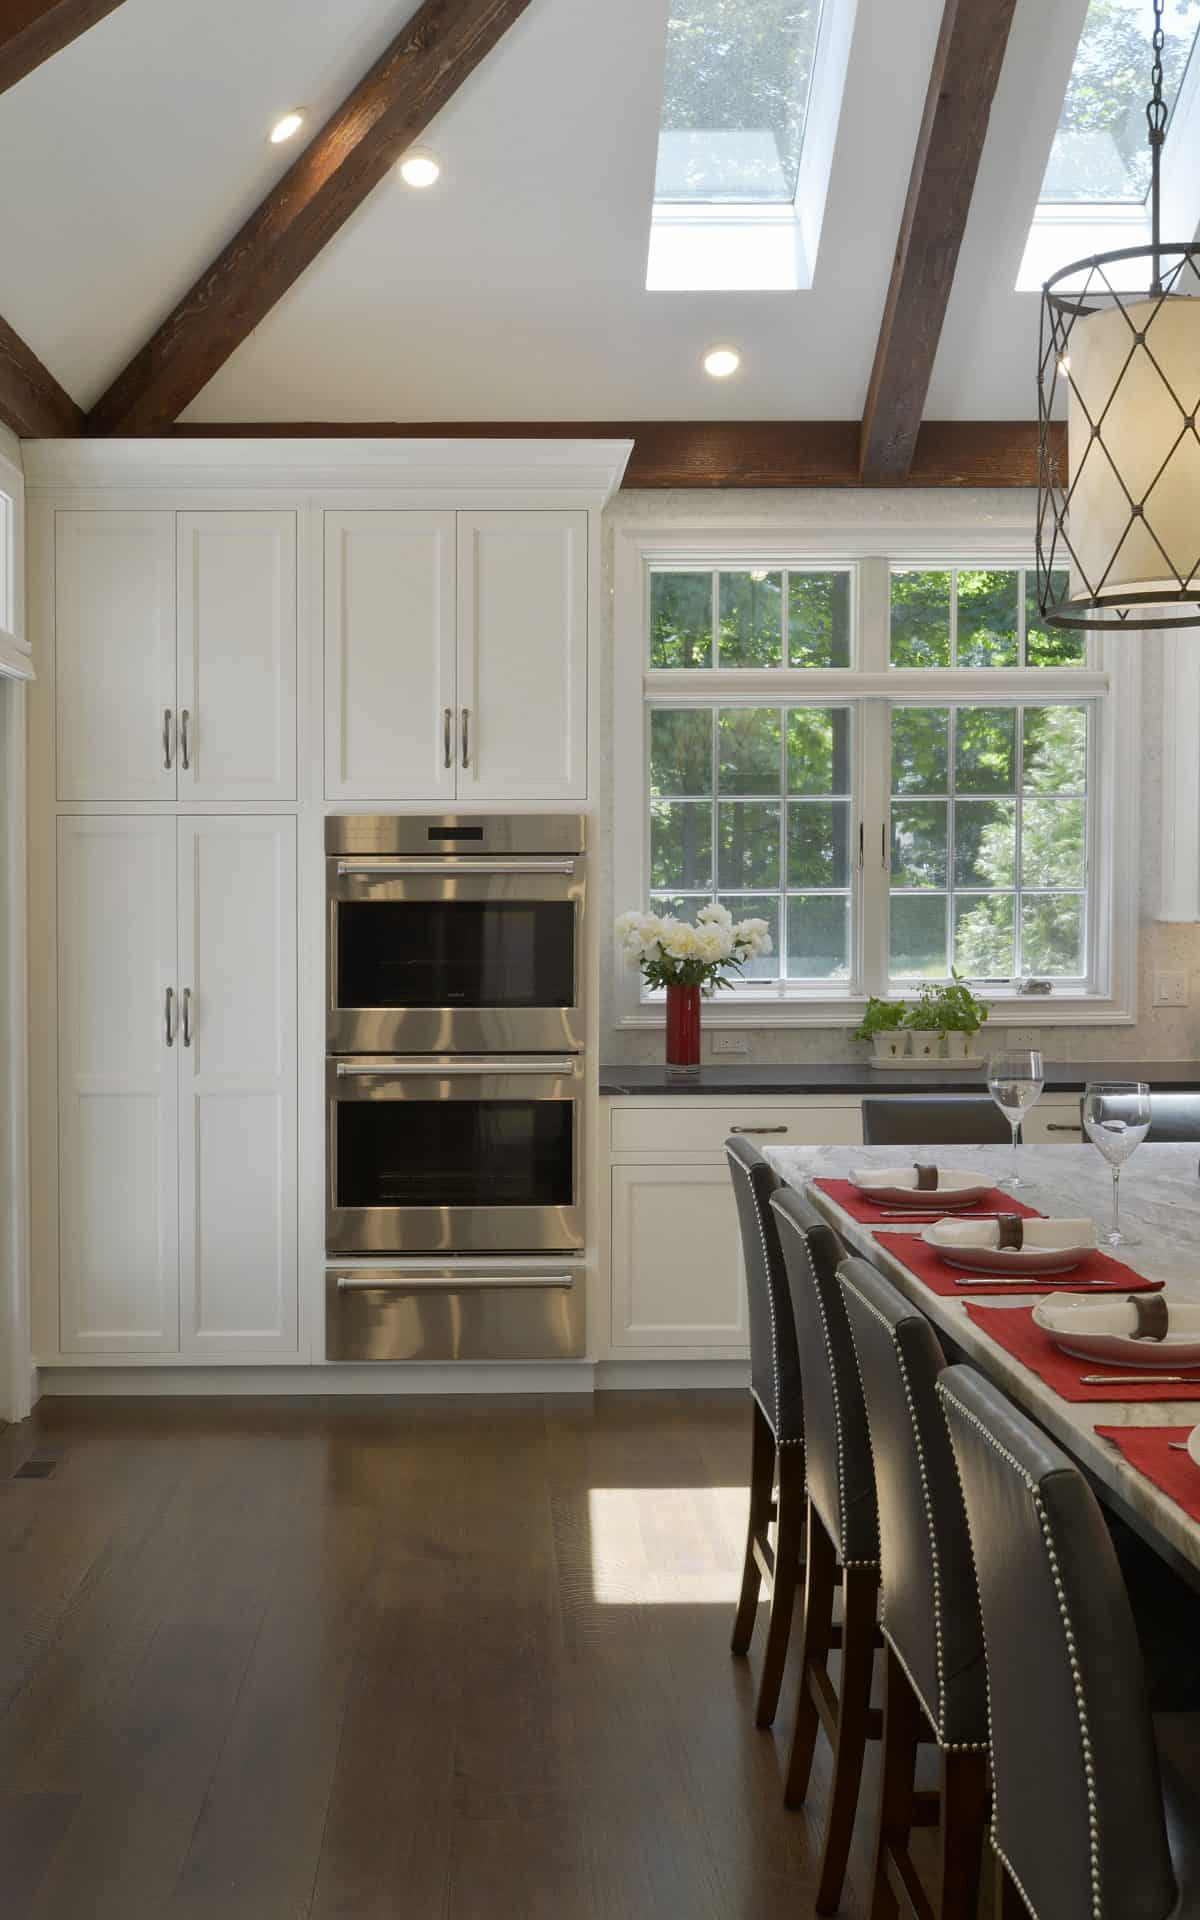 Classic kitchen features white Bilotta custom cabinets, inset oven, custom island and large windows.